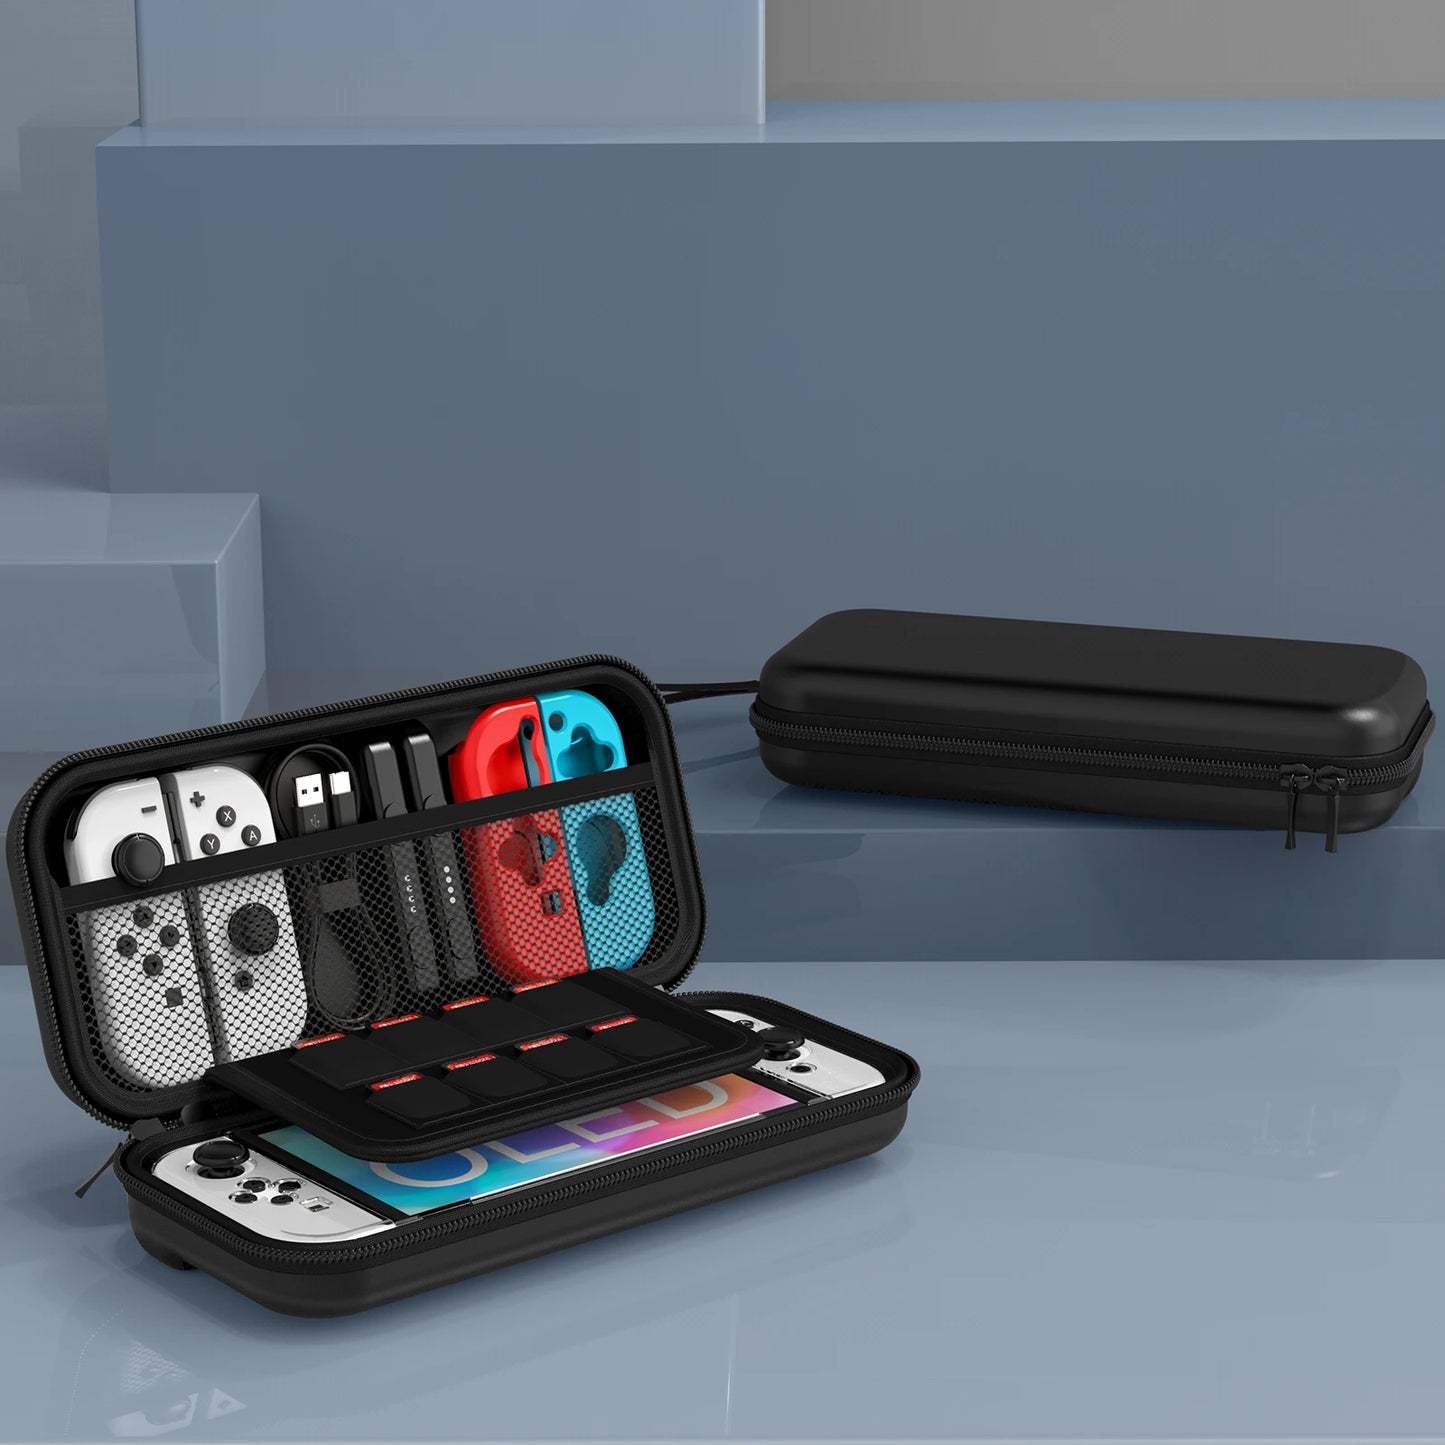 For Switch OLED Model Carrying Case 9 in 1 Accessories Kit